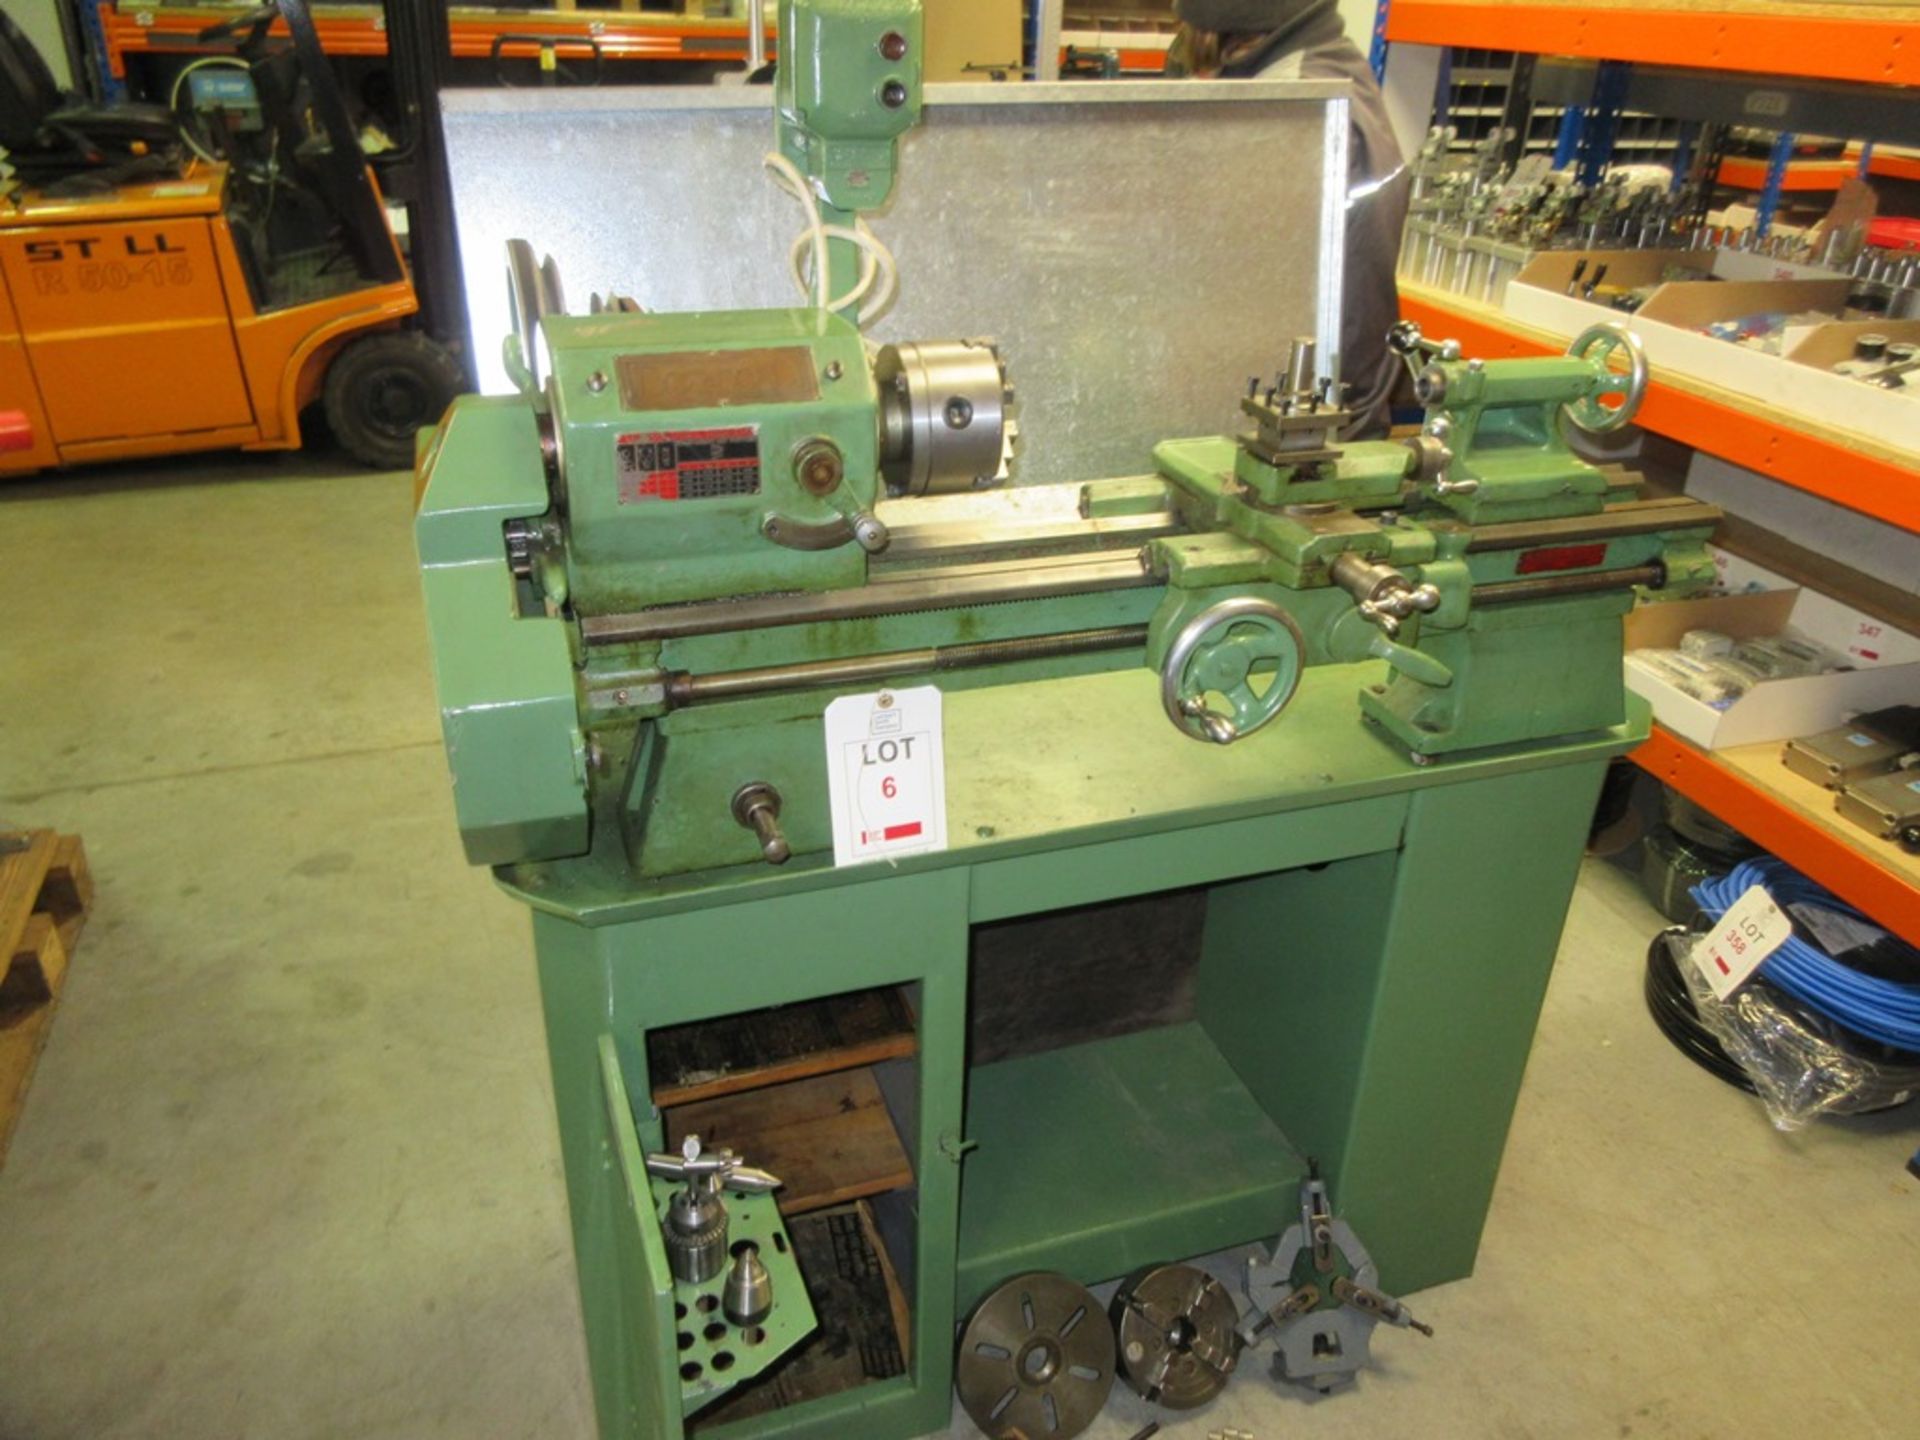 Boxford Lathe 240v 18"between centres with tooling as shown (guard missing) - loaded to suitable